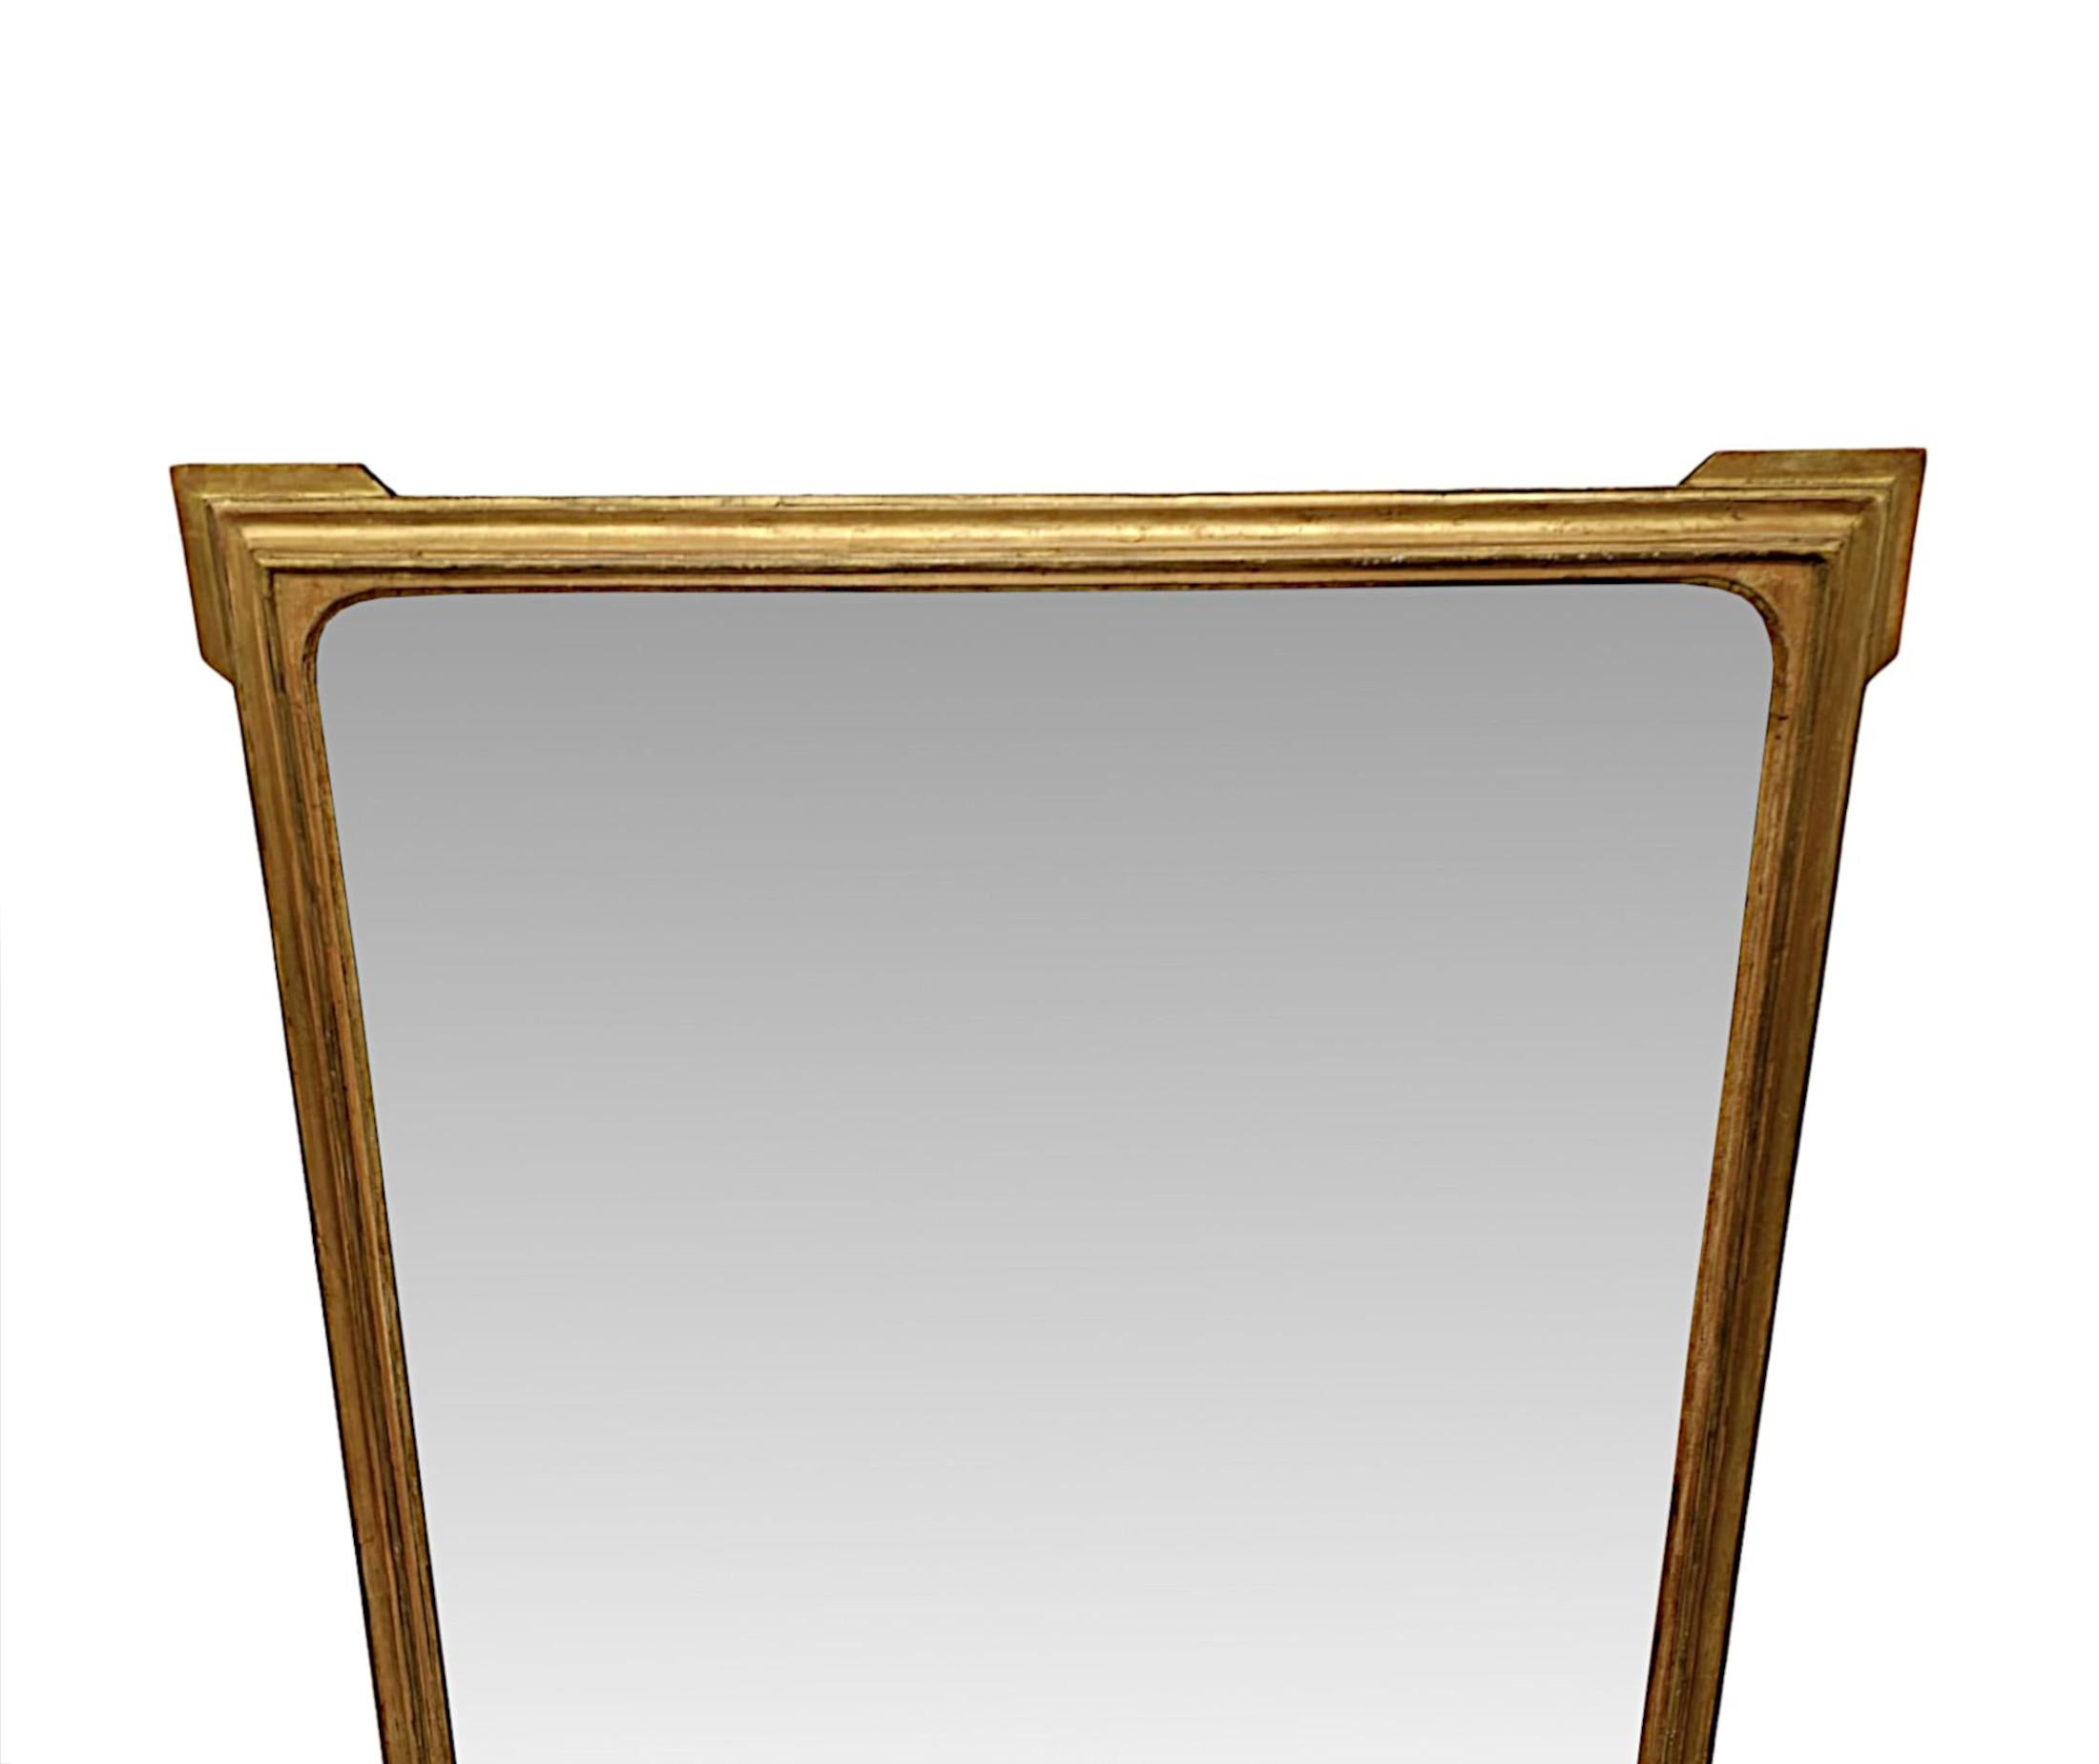 A fabulous 19th Century giltwood overmantel mirror of exceptional quality and grand proportions.  The  mirror glass plate of rectangular form is set within a finely hand carved and beautifully simple, moulded and fluted giltwood frame with shaped